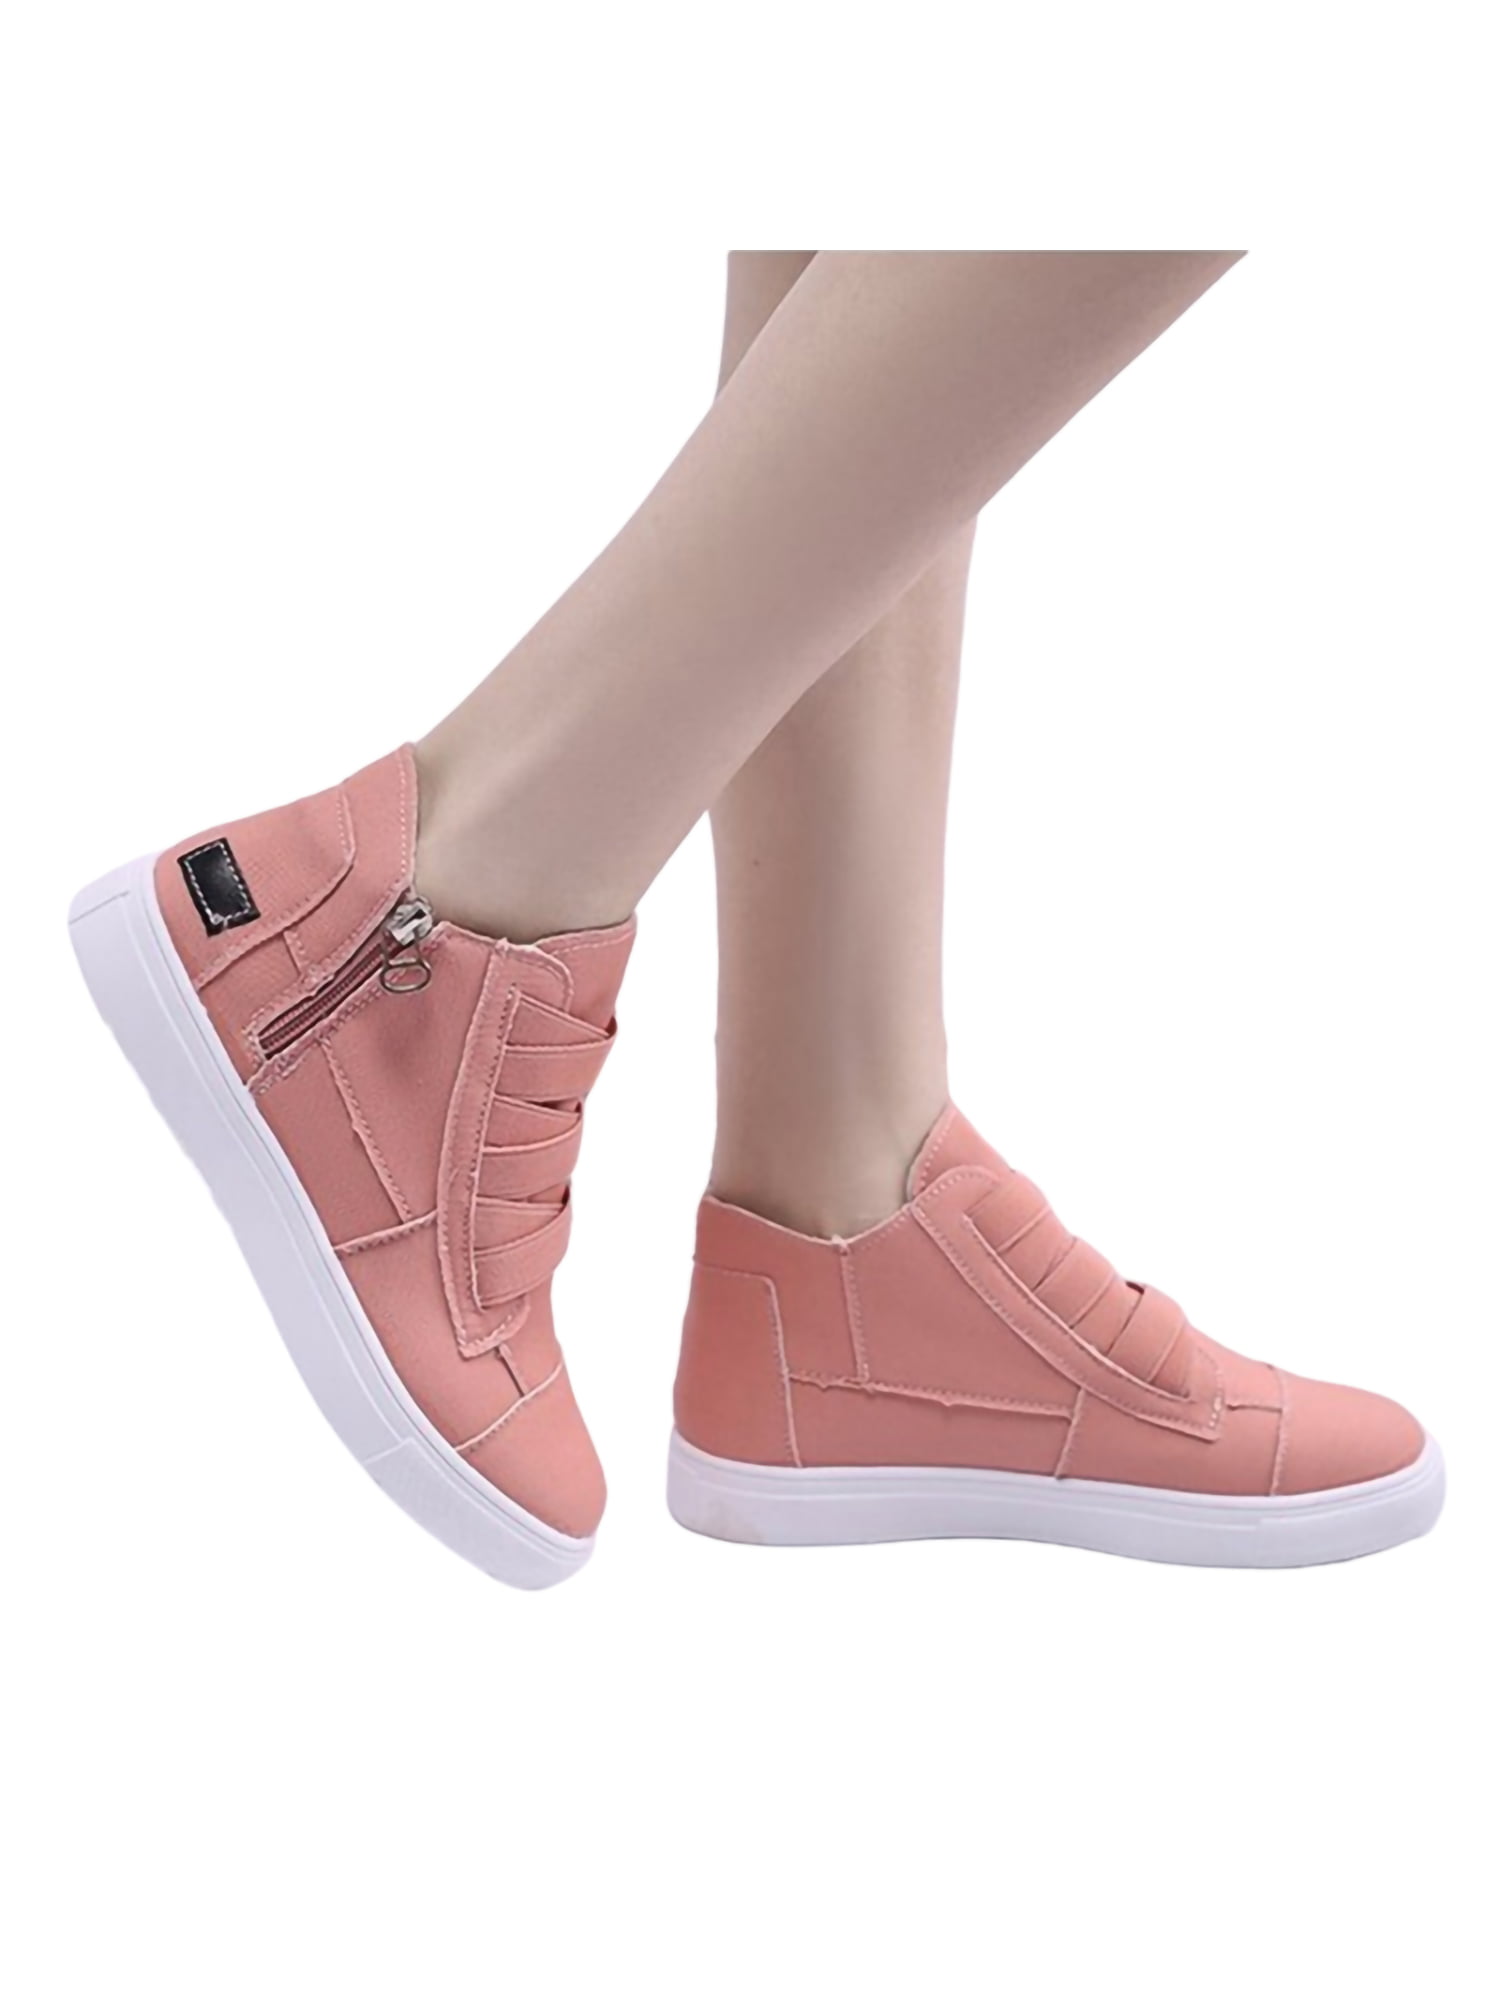 Womens side zip Canvas platform High top casual comfort sneakers ankle shoes 